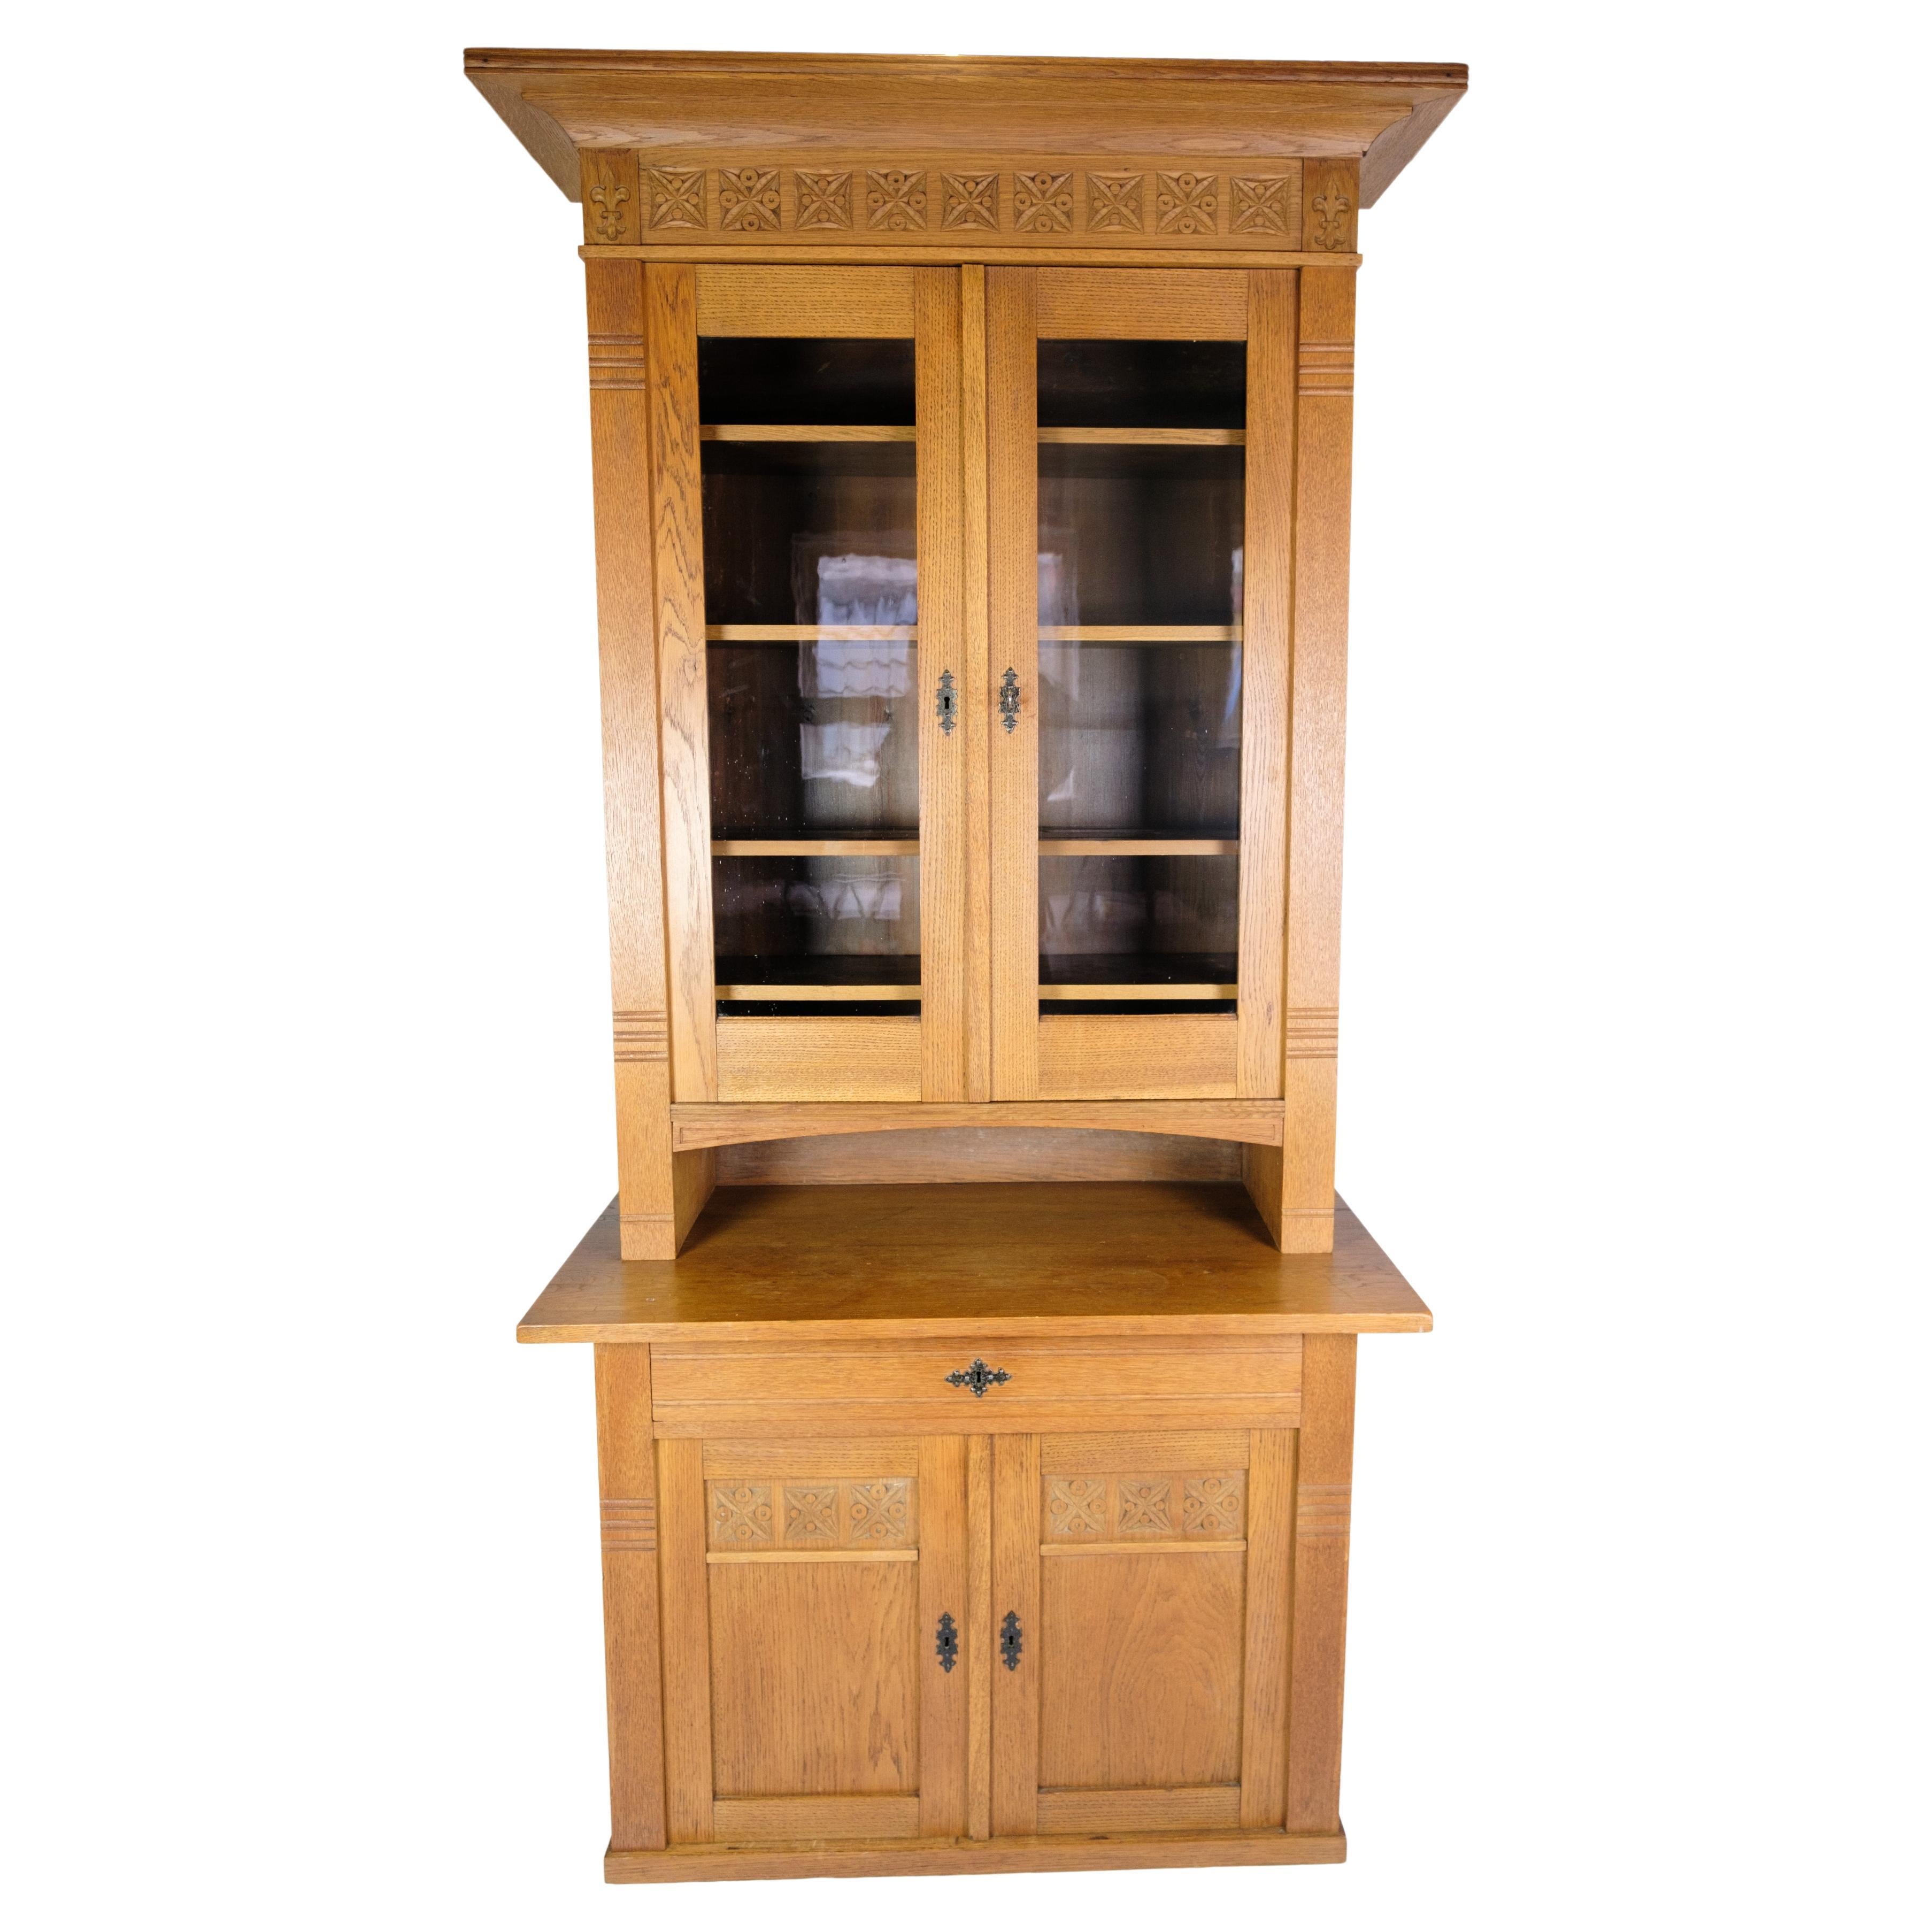 Antique Oak Vitrine Cabinet with Glass Doors and The Original Key from 1880s